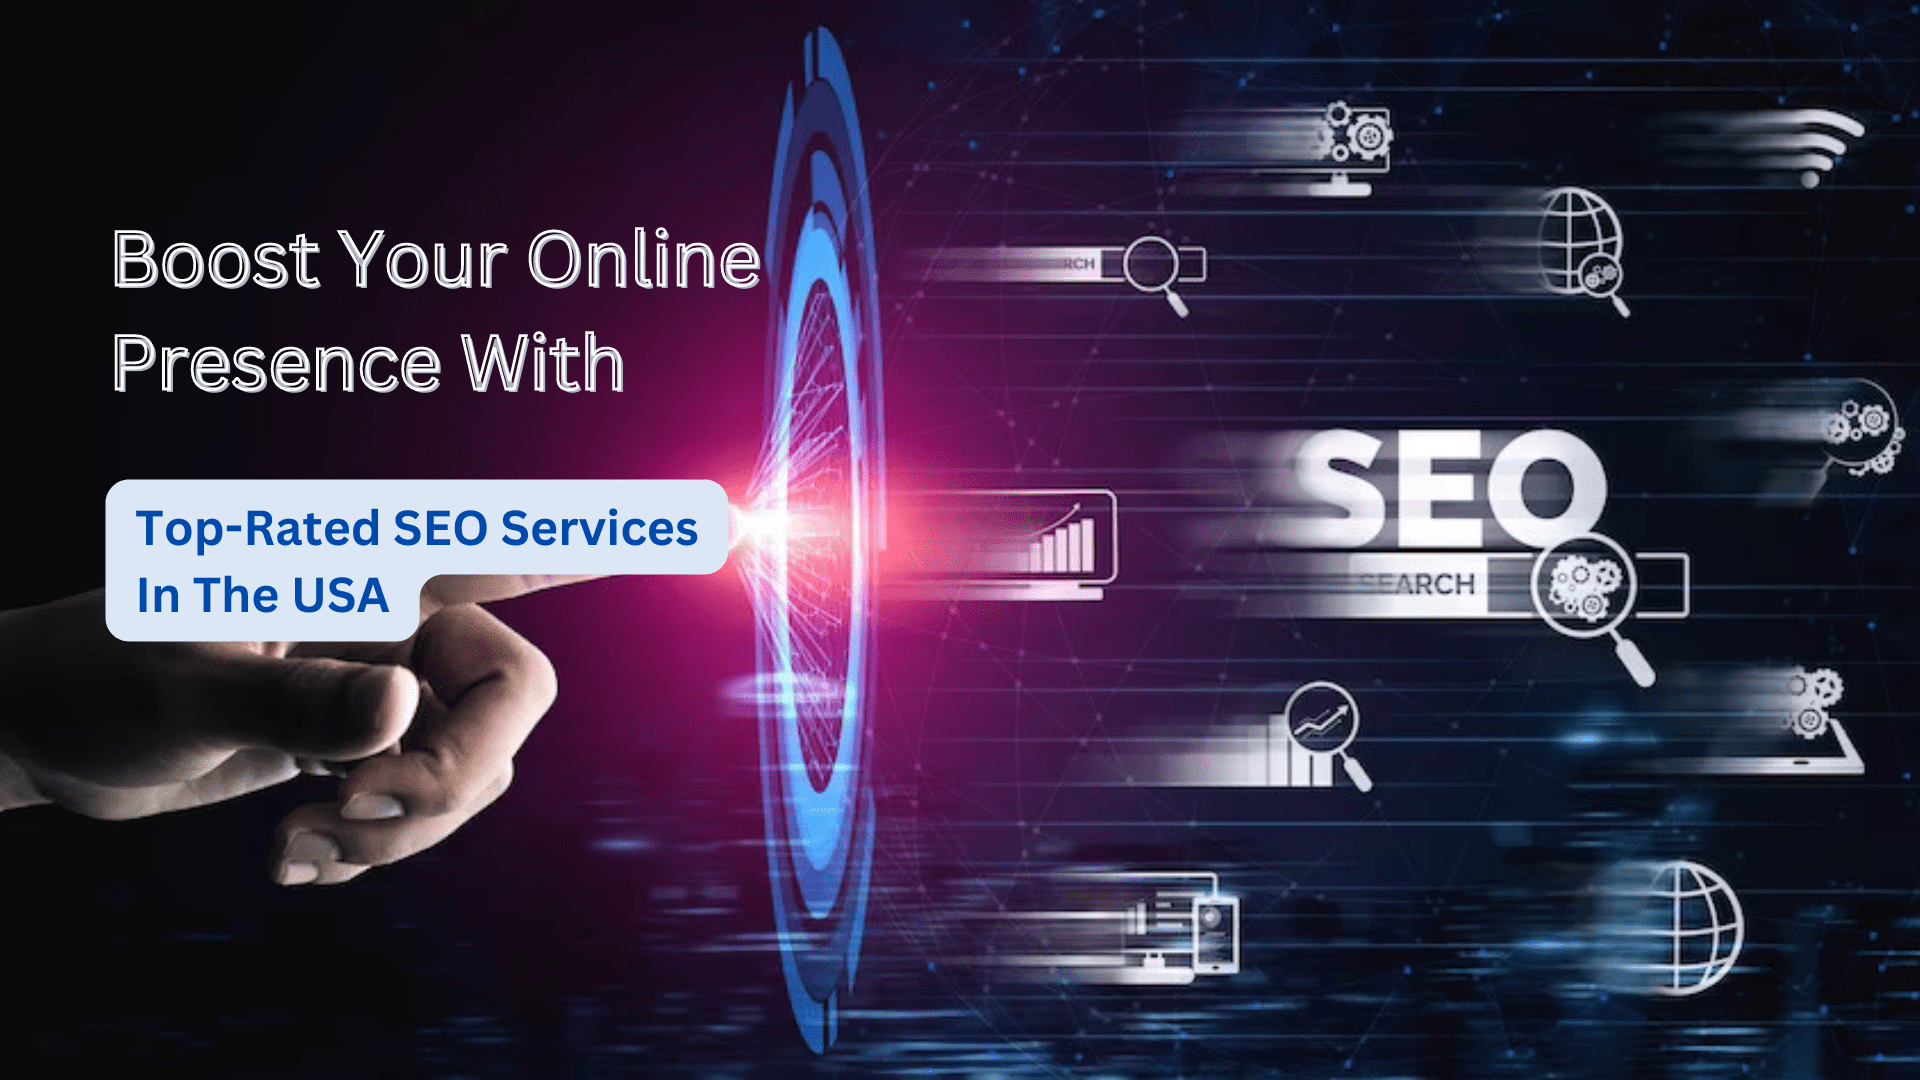 You are currently viewing Boost Your Online Presence with Top-Rated SEO Services in the USA